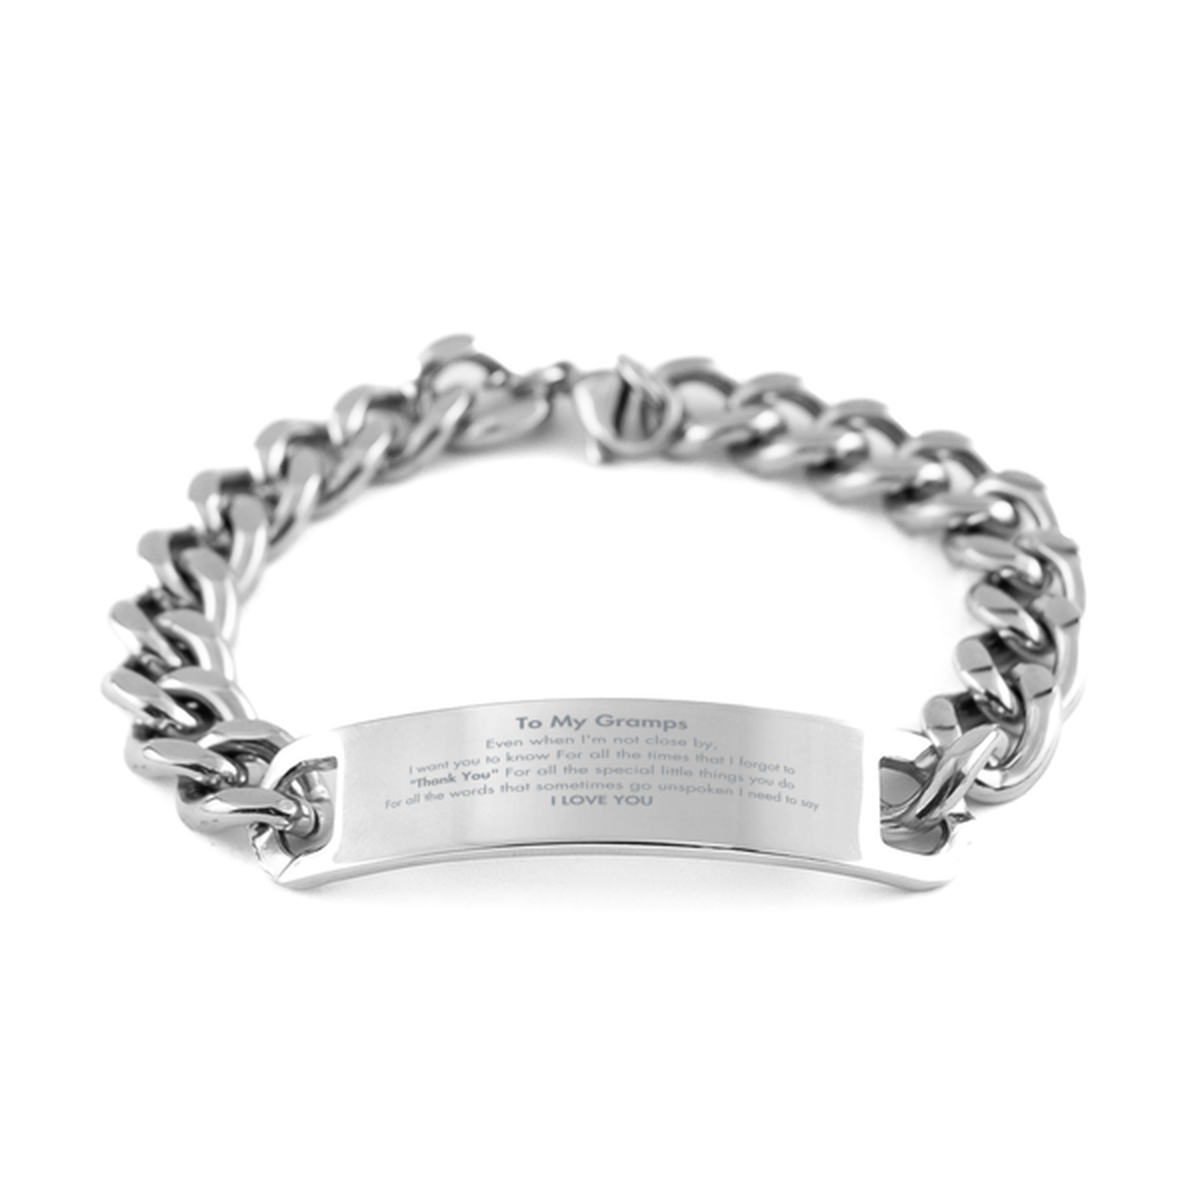 Thank You Gifts for Gramps, Keepsake Cuban Chain Stainless Steel Bracelet Gifts for Gramps Birthday Mother's day Father's Day Gramps For all the words That sometimes go unspoken I need to say I LOVE YOU